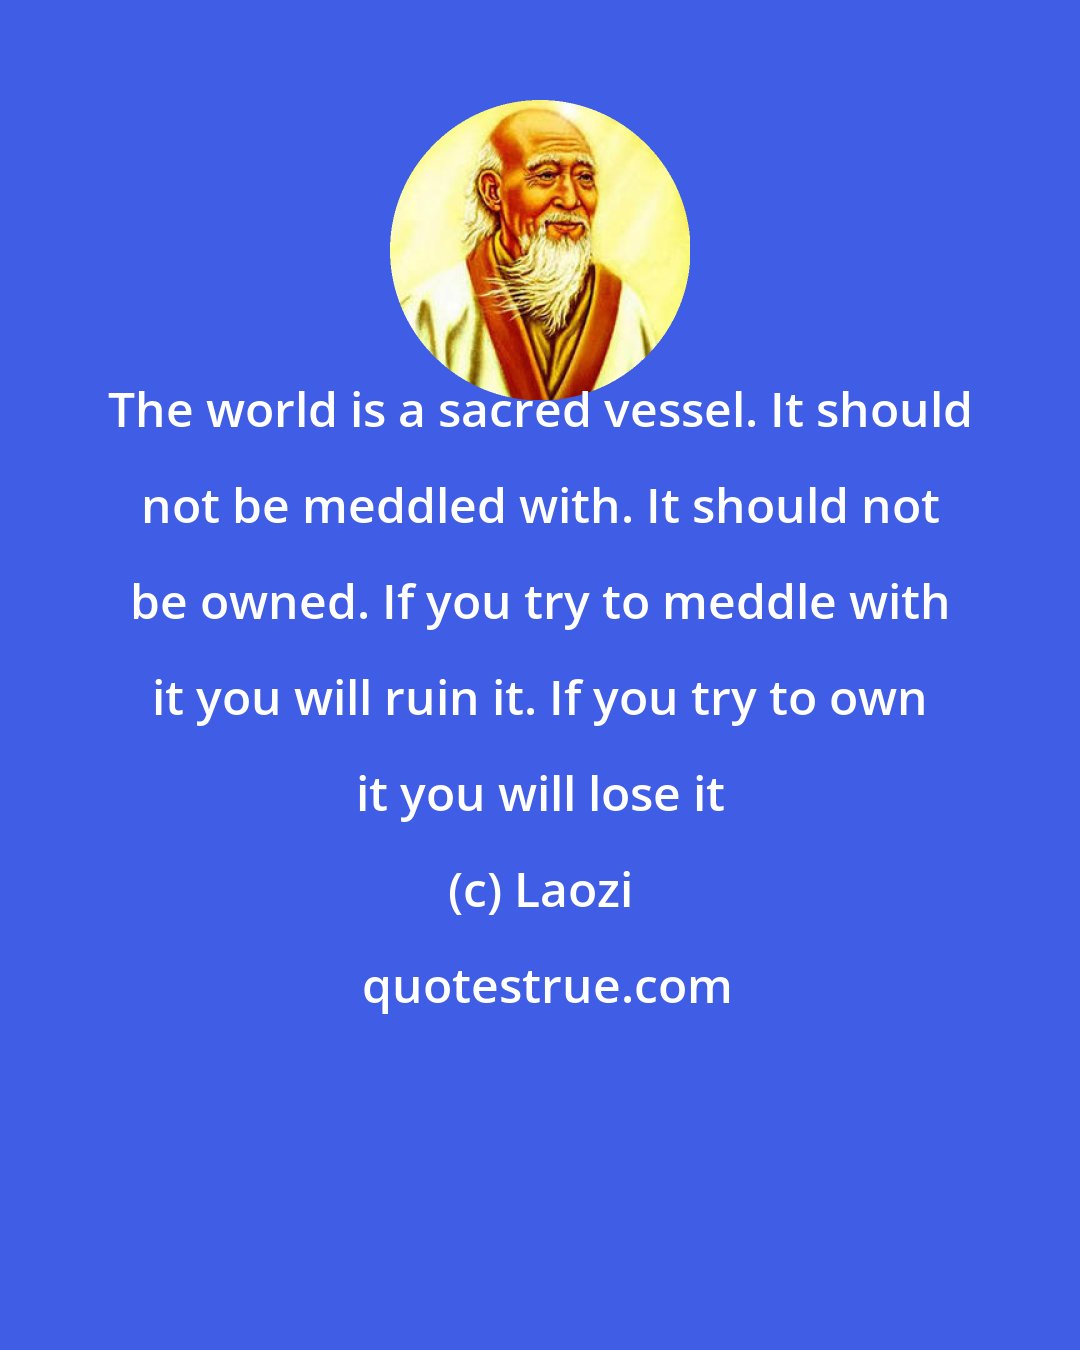 Laozi: The world is a sacred vessel. It should not be meddled with. It should not be owned. If you try to meddle with it you will ruin it. If you try to own it you will lose it